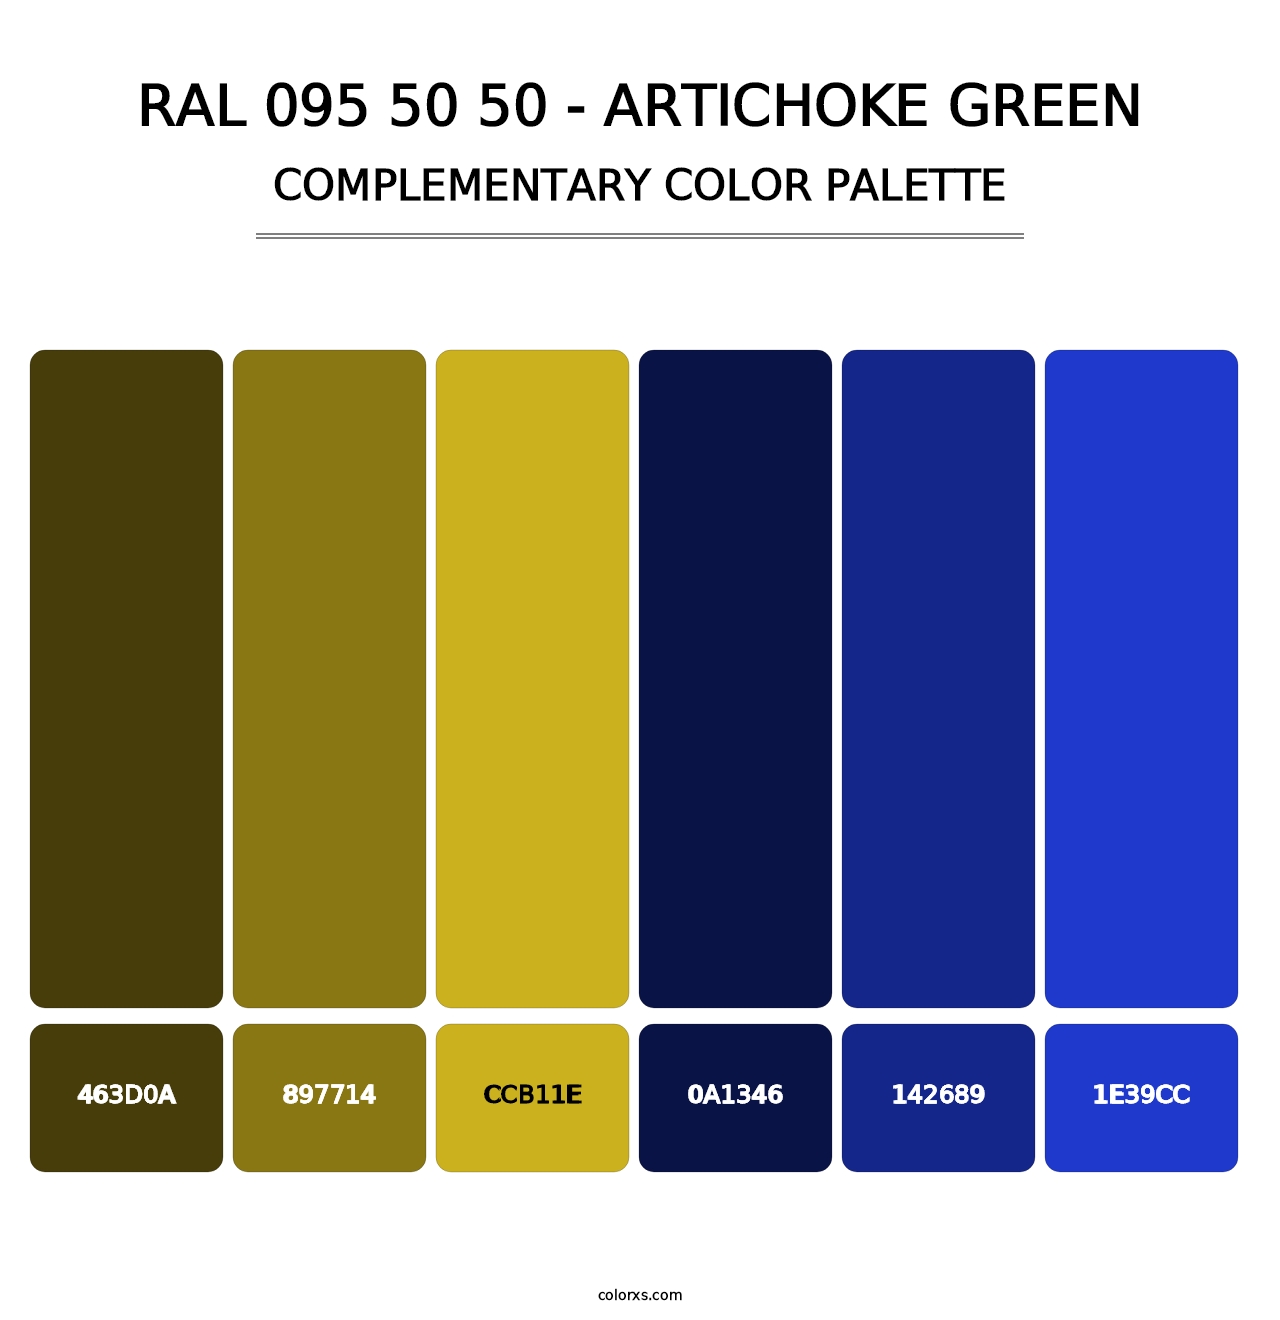 RAL 095 50 50 - Artichoke Green - Complementary Color Palette